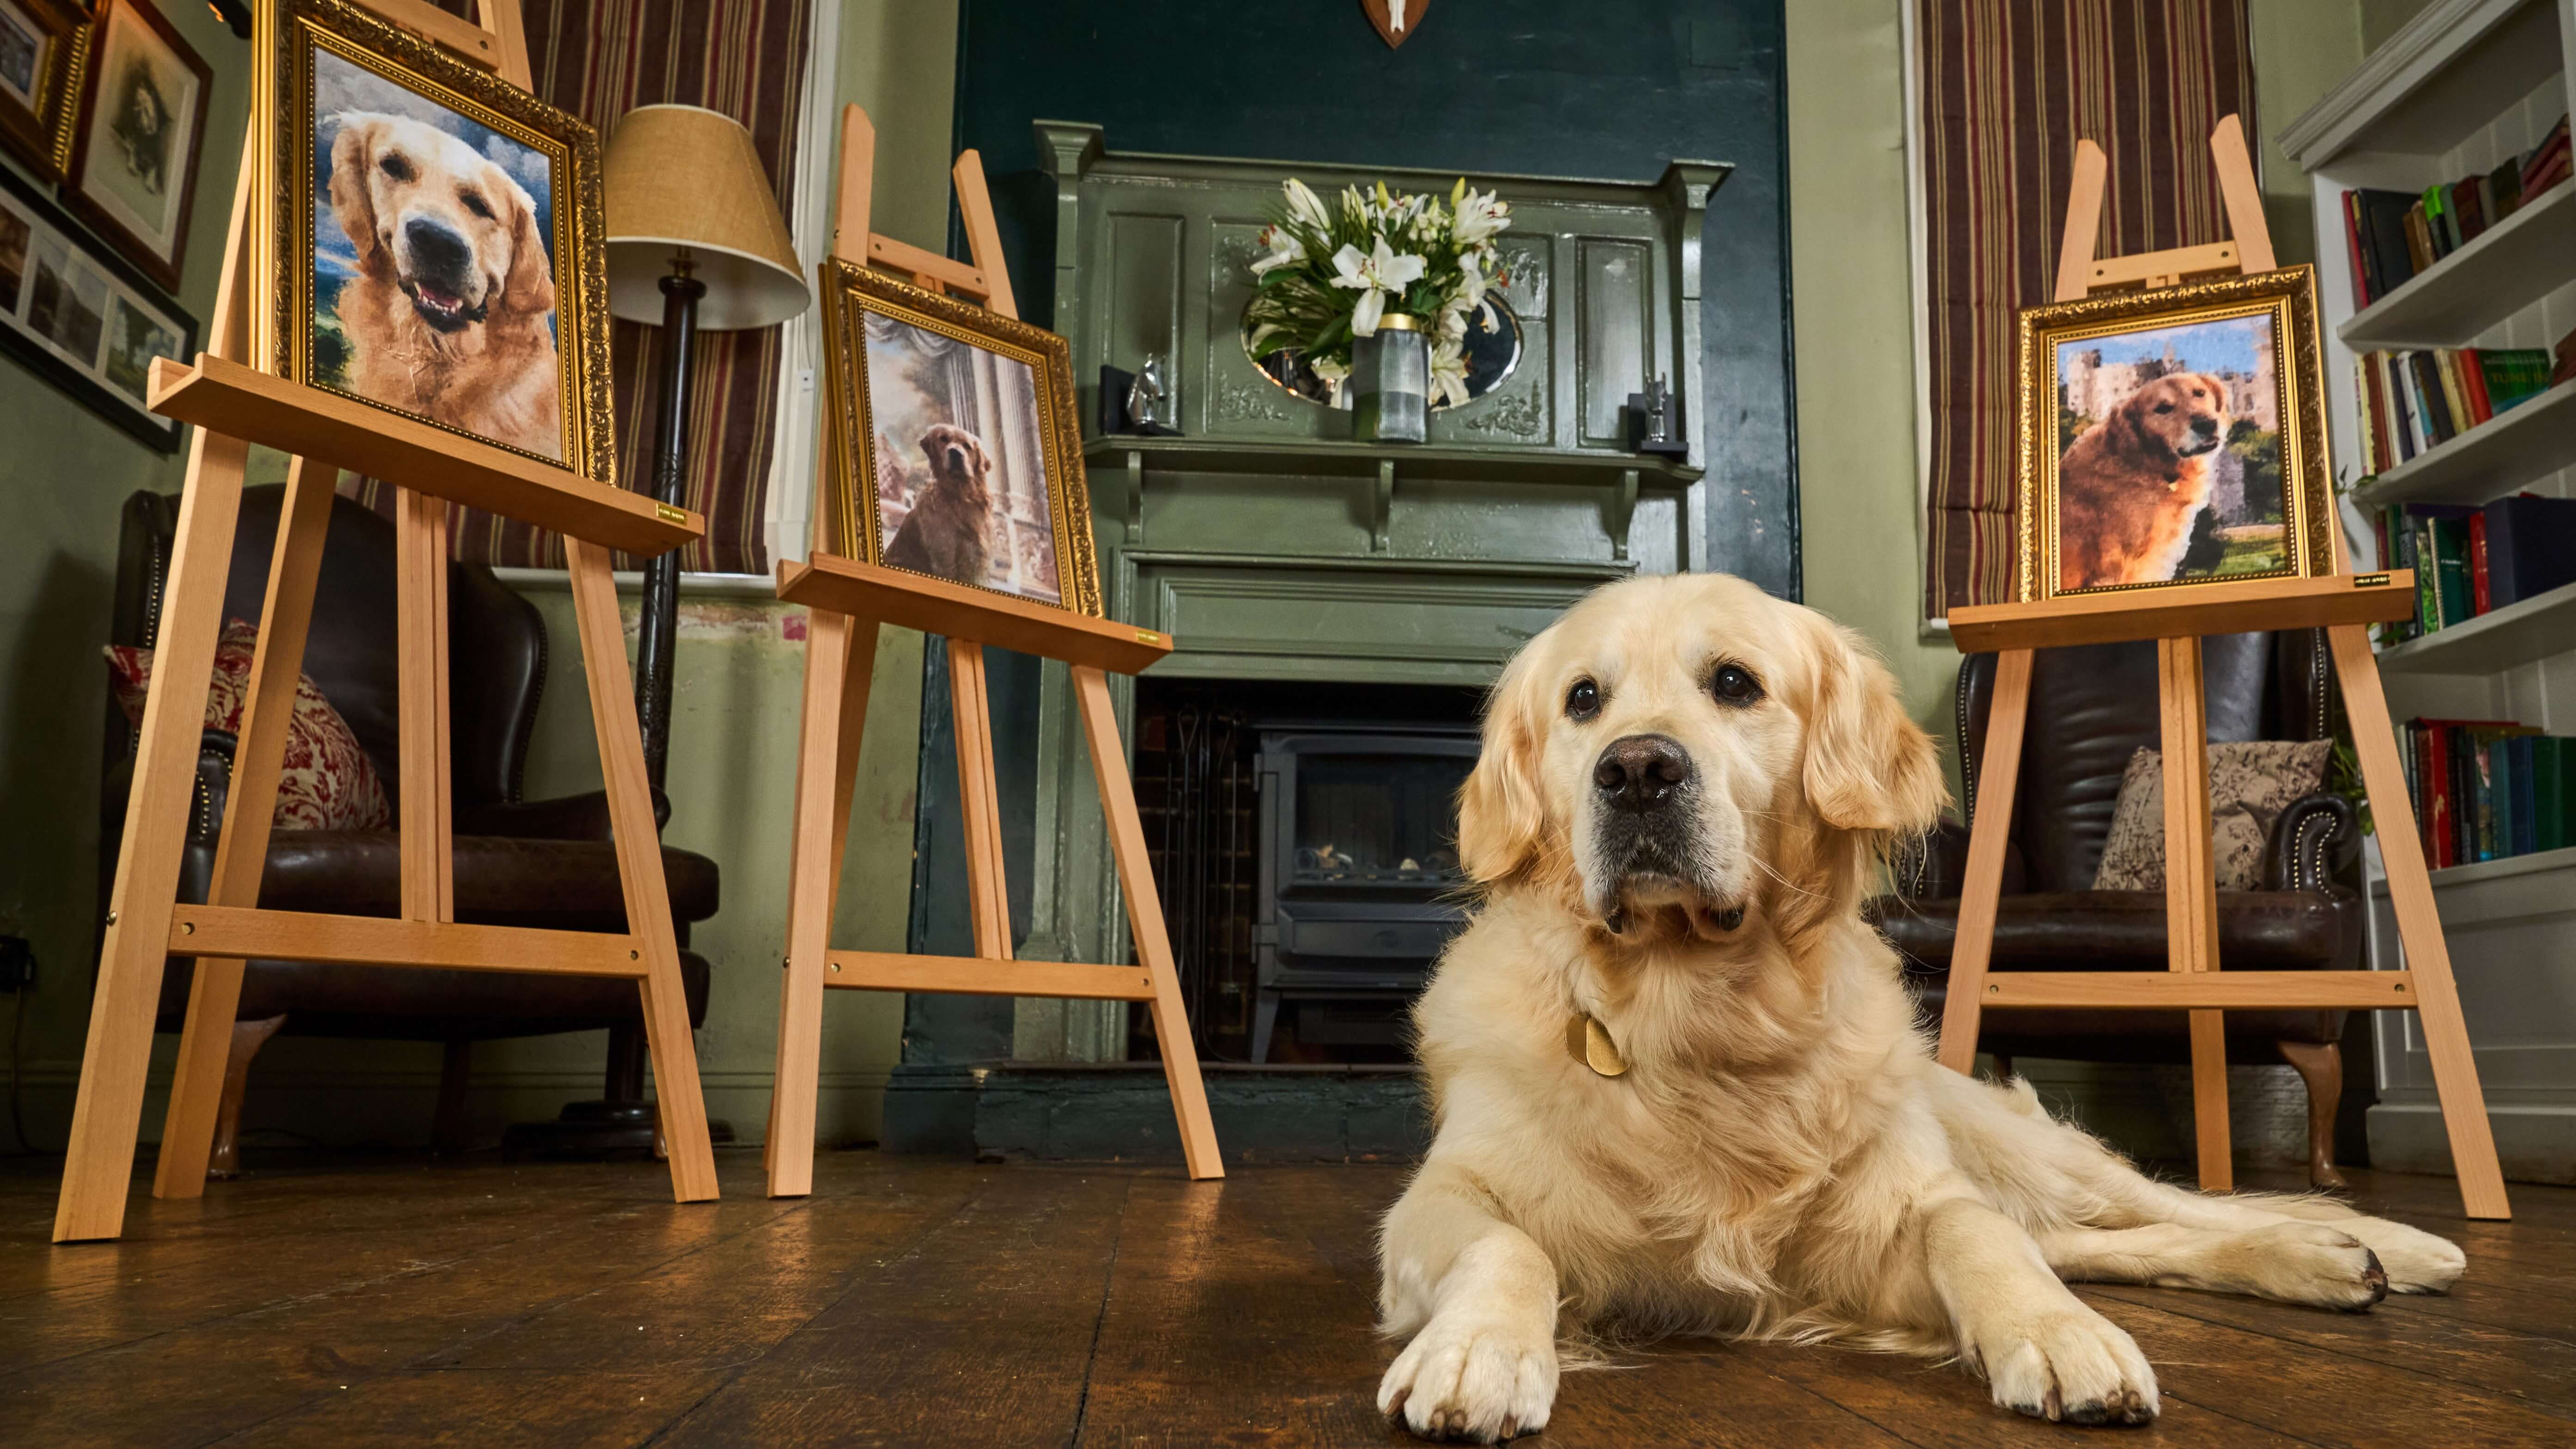 Guide dog dad Pierre, a golden retriever, lays on a wood floor in front of a log burner. He is surrounded by three easels each displaying his golden retriever dad, grandfather and great grandfather,